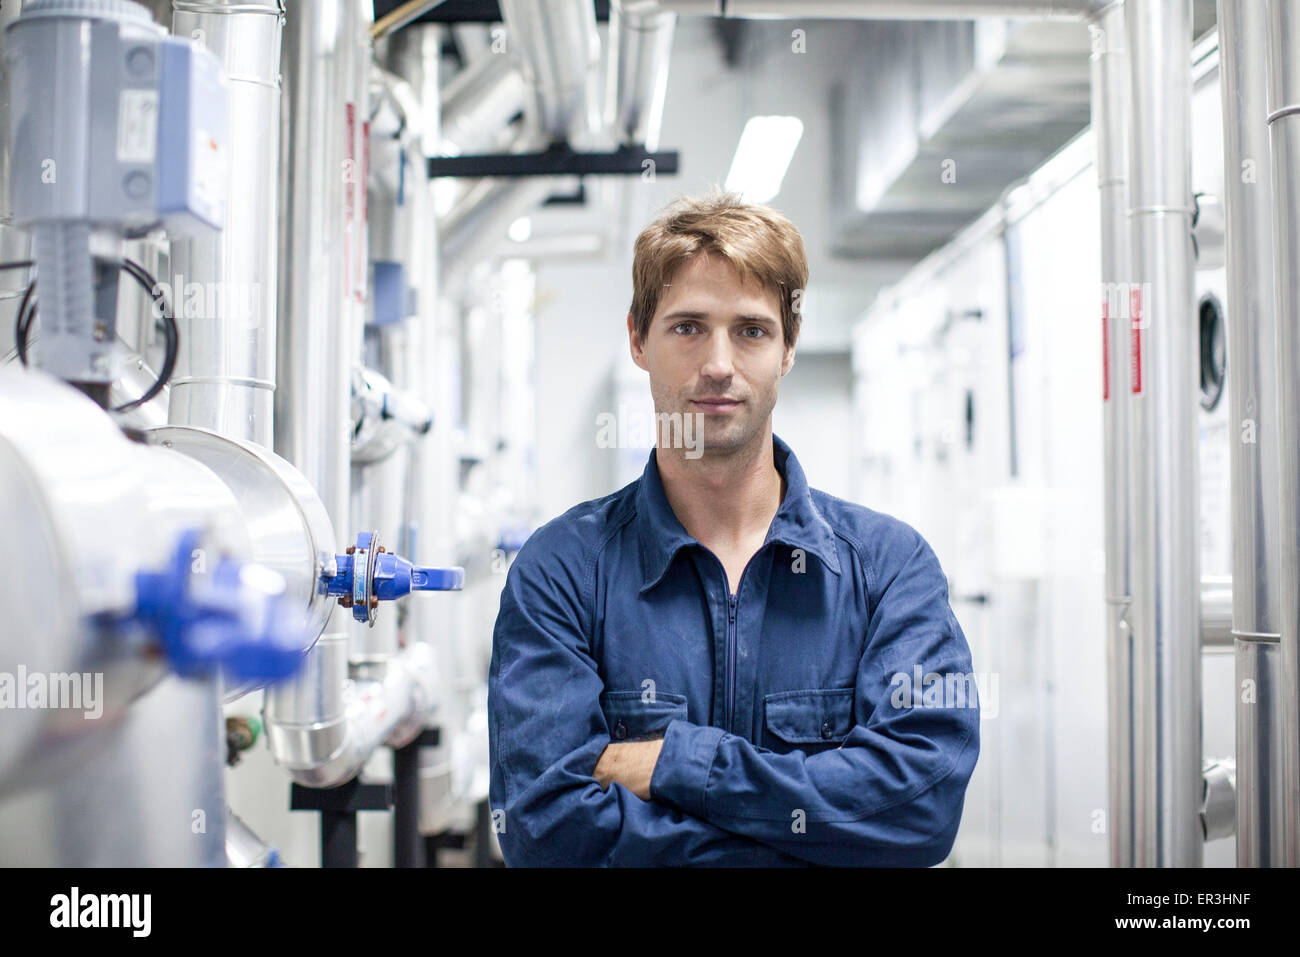 Skilled worker in industrial plant, portrait Stock Photo